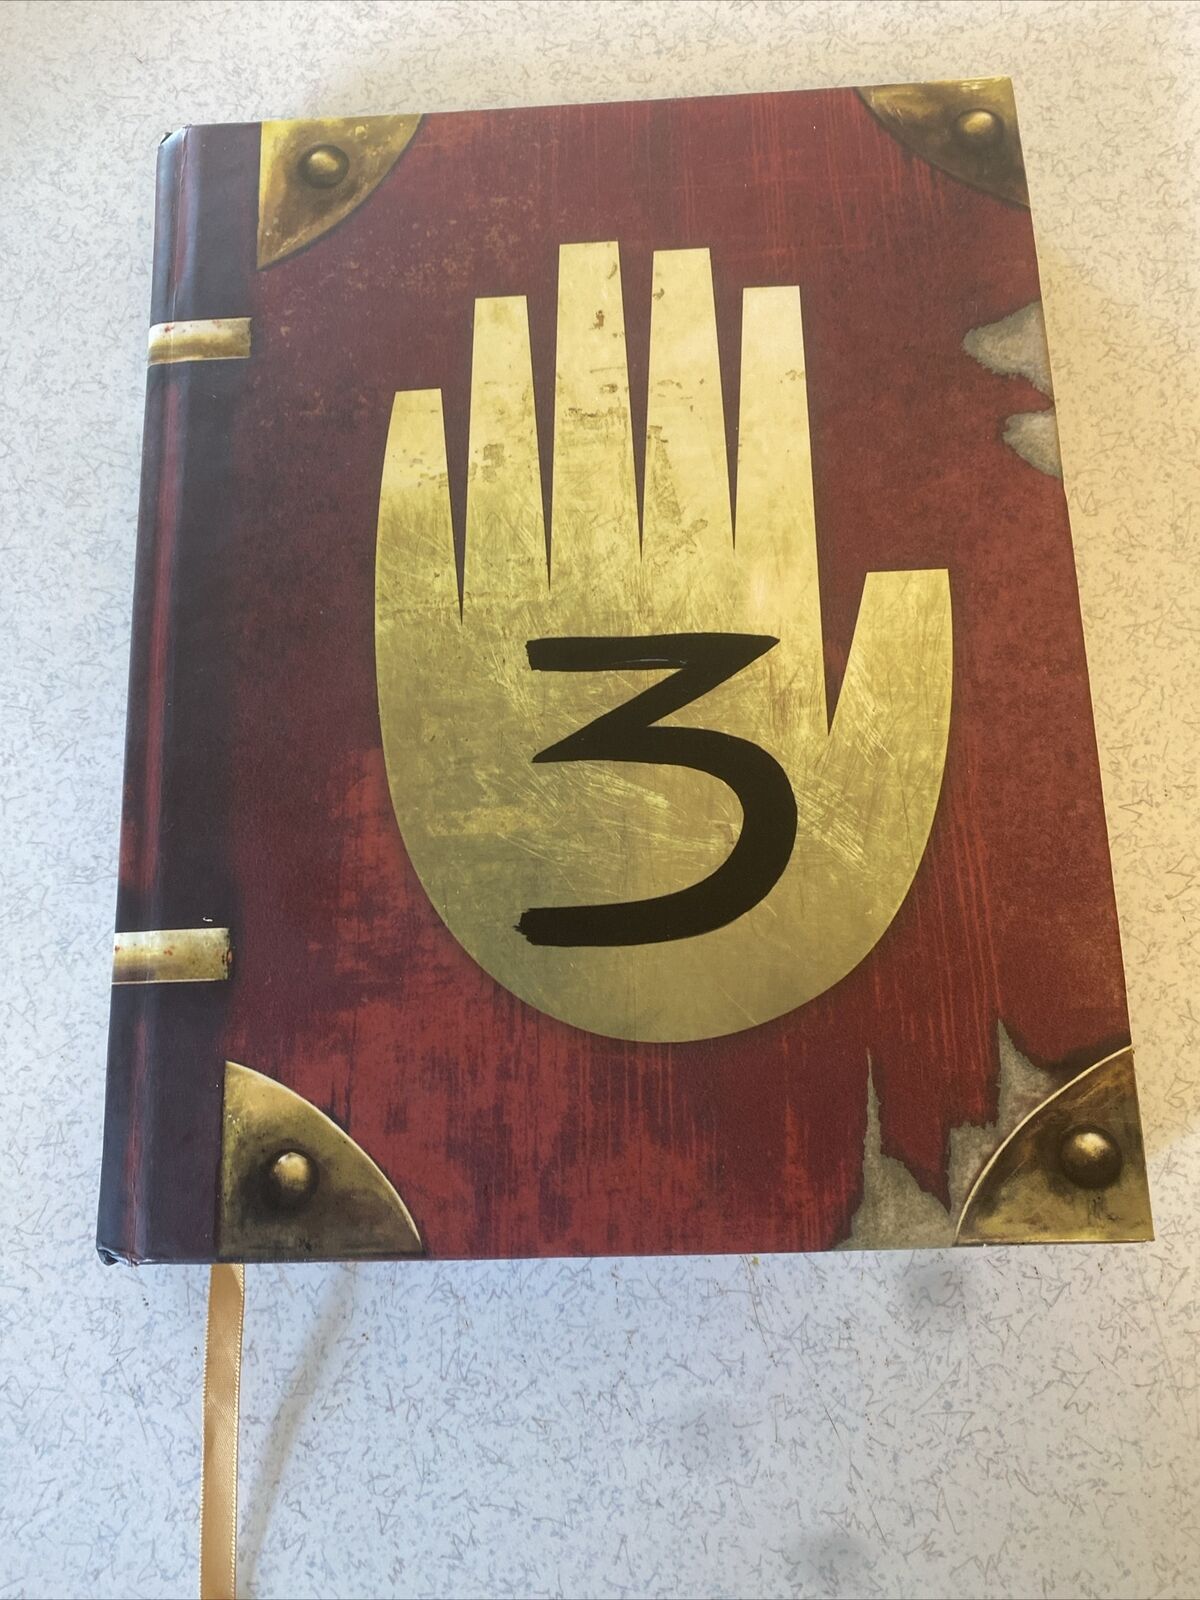 Gravity Falls: Journal 3 First Edition by Rob Renzetti and Alex Hirsch (2016)